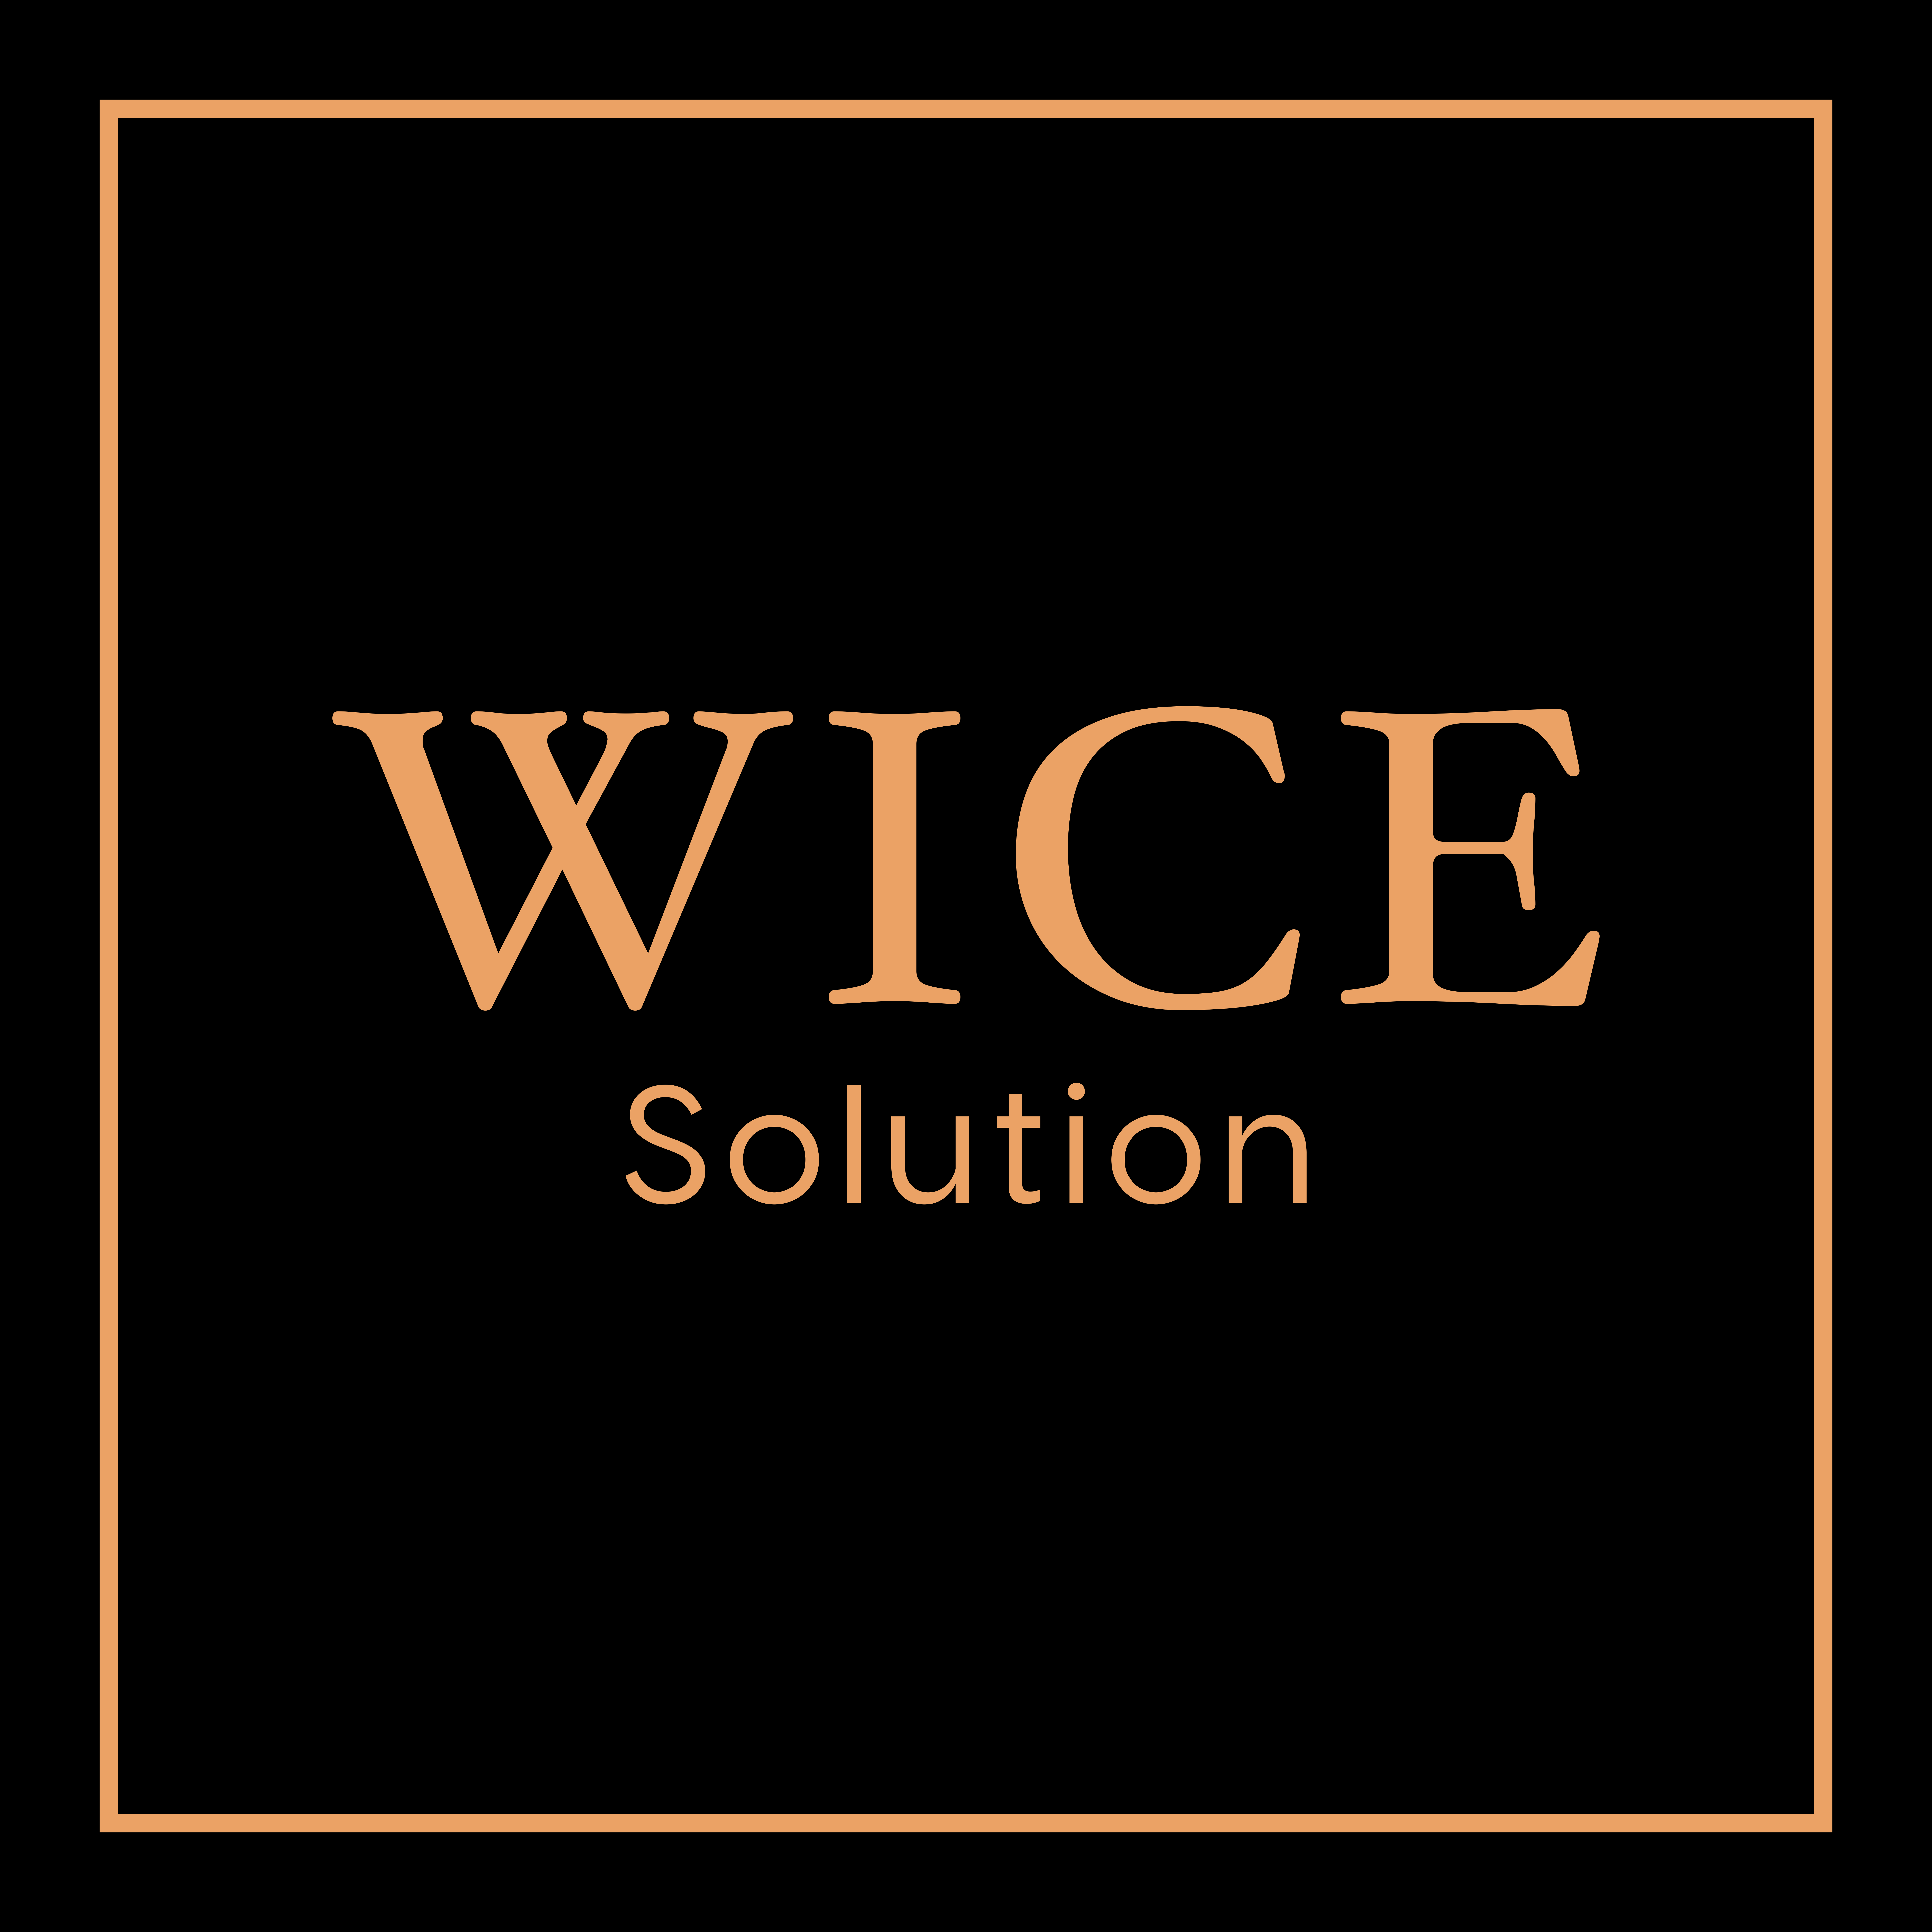 WICE Solution